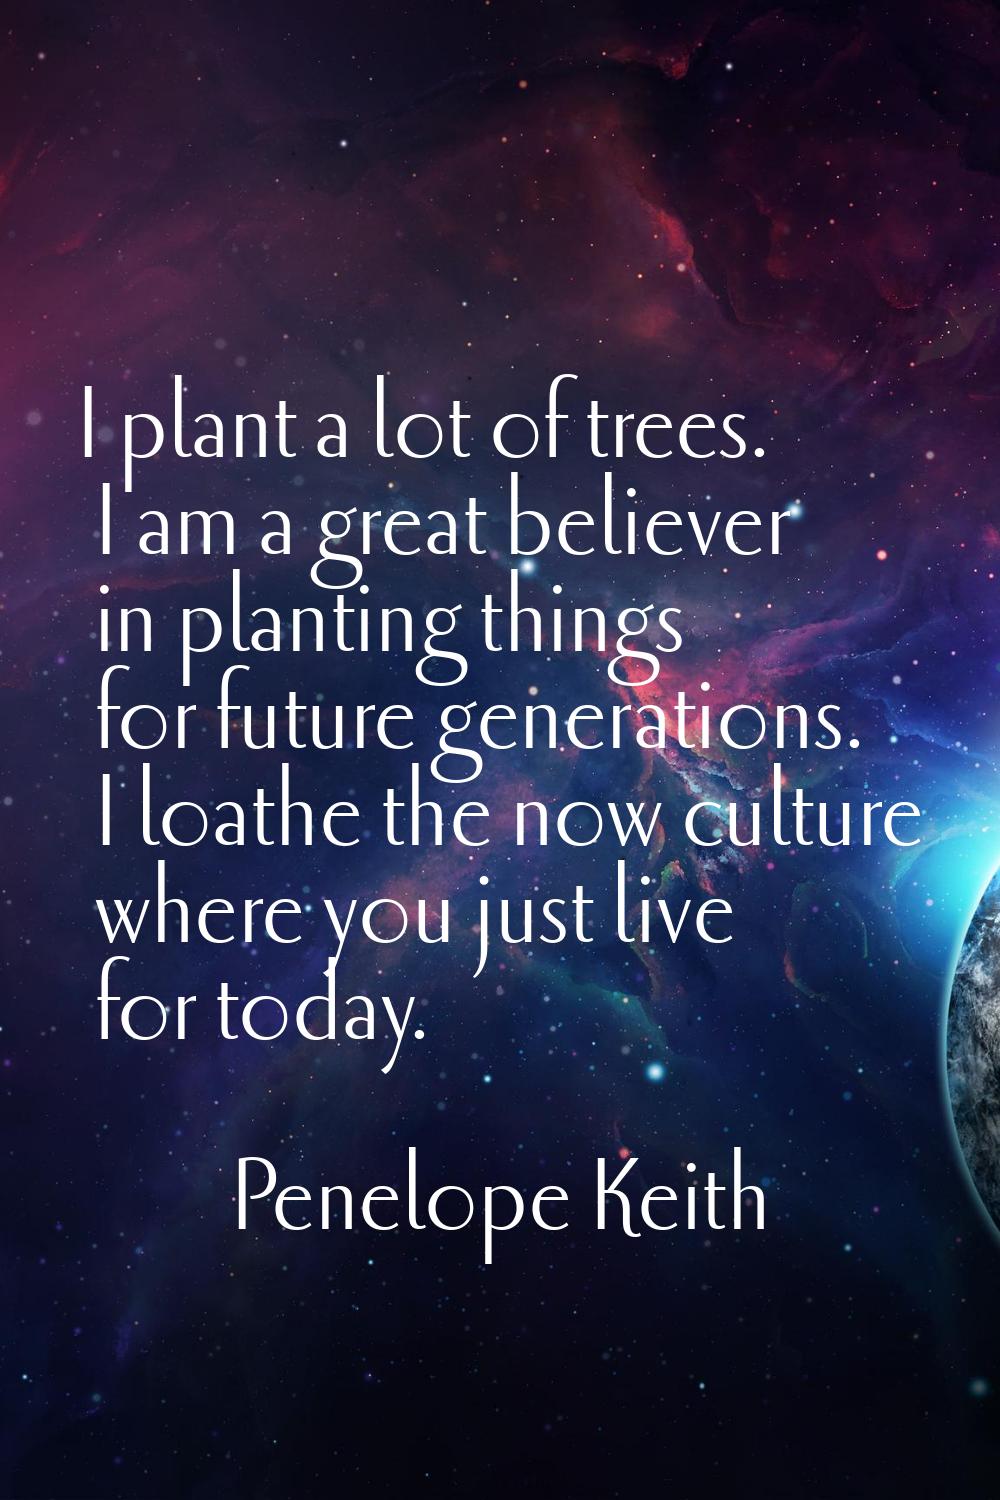 I plant a lot of trees. I am a great believer in planting things for future generations. I loathe t